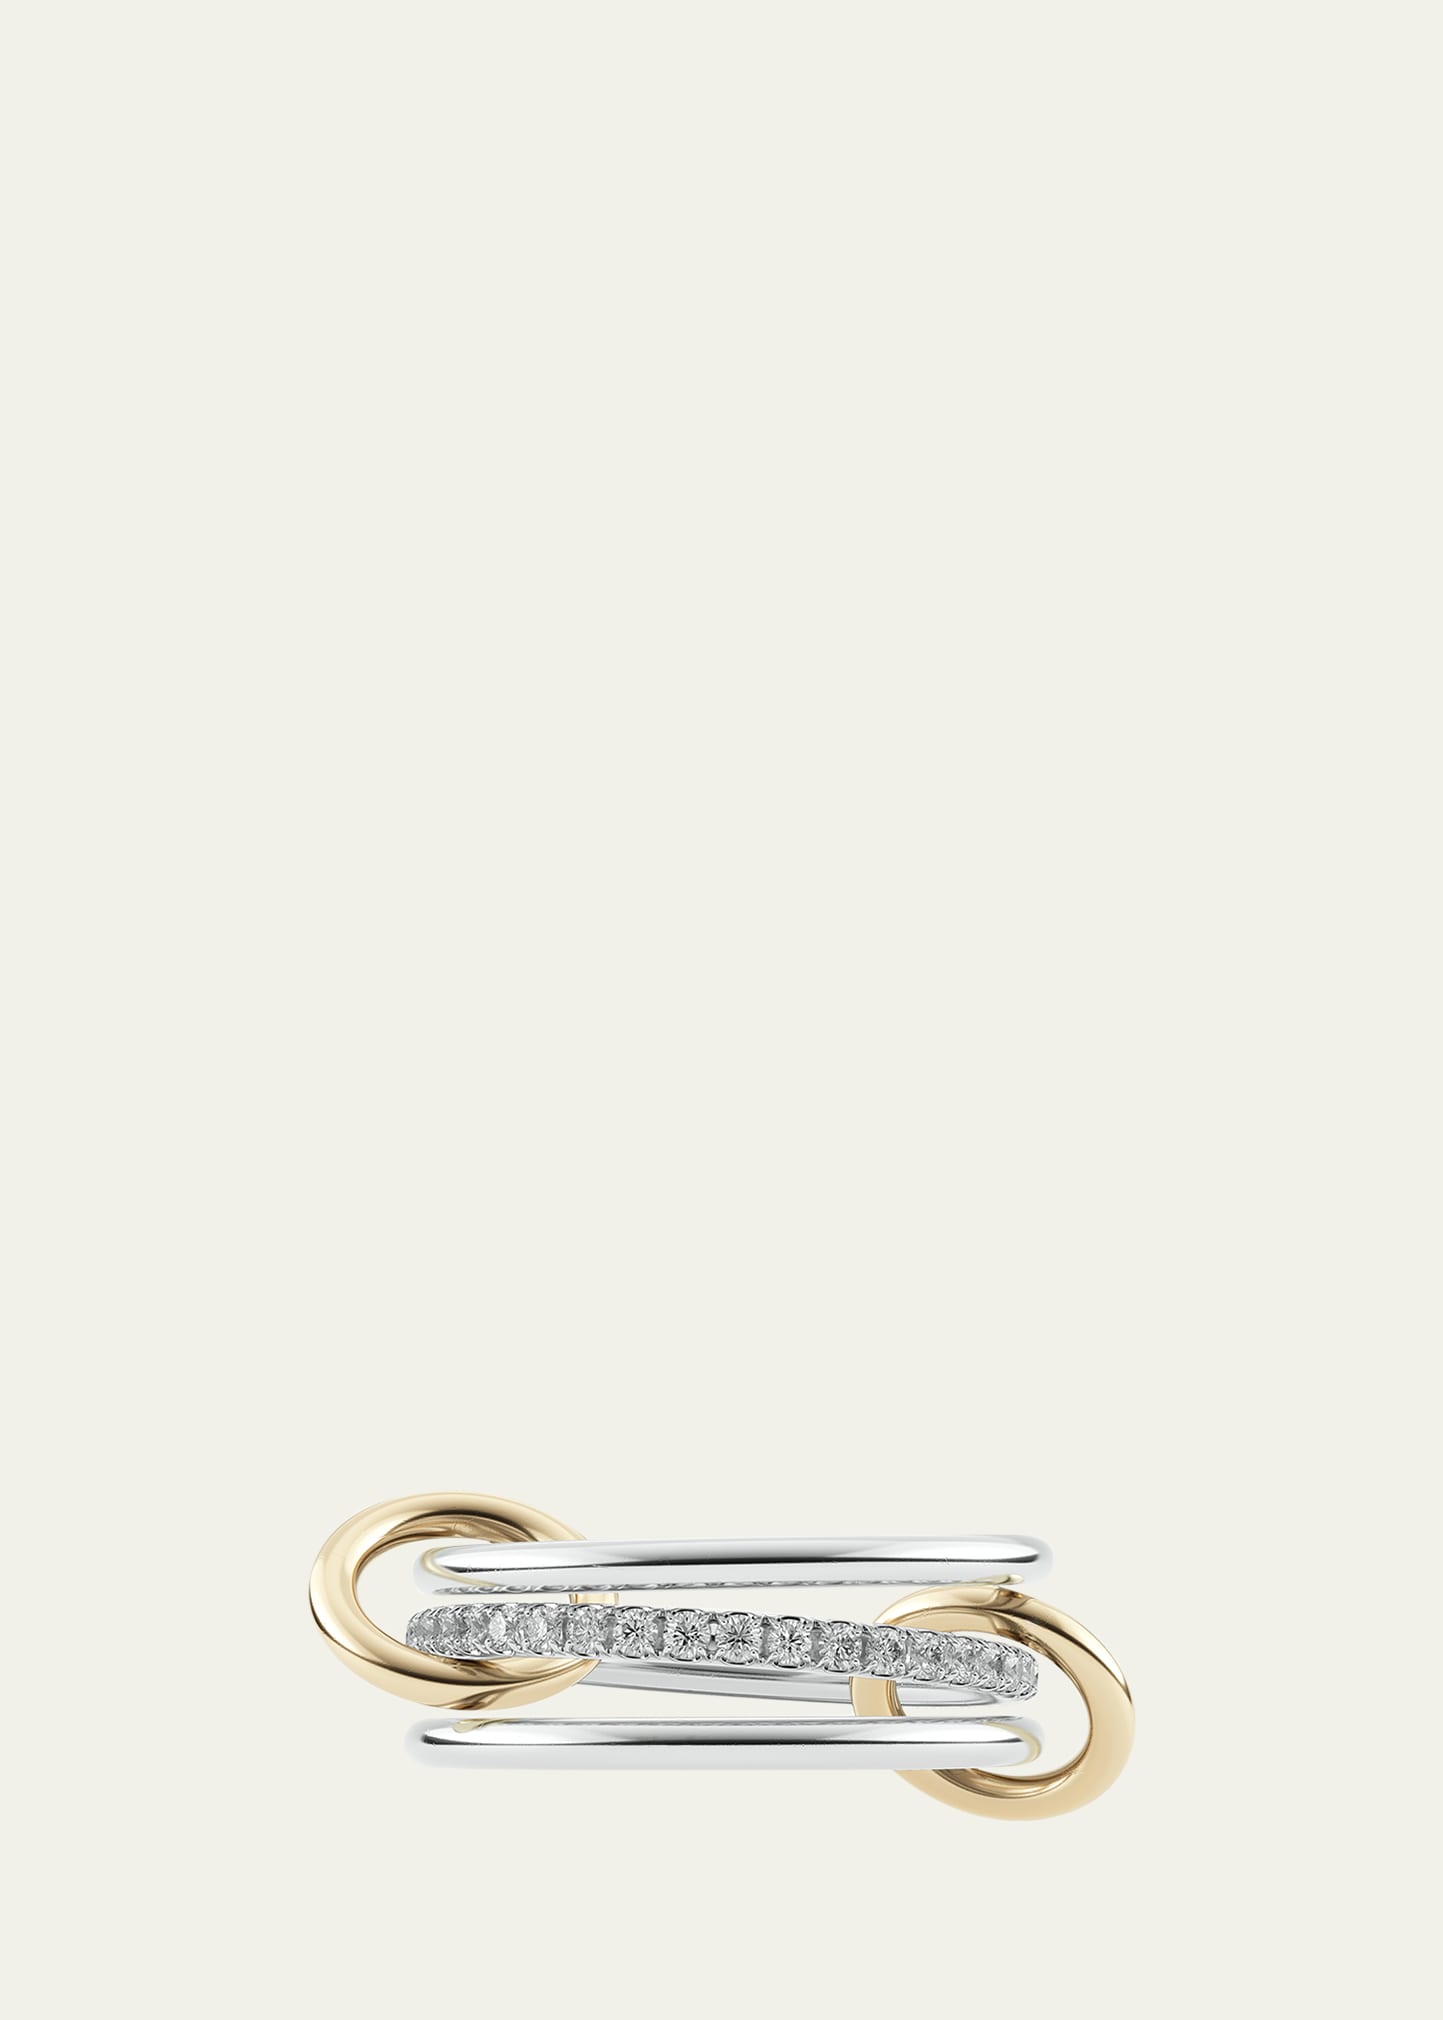 Sonny SG Gris Three Link Ring in Sterling Silver with U-Pave Grey Diamonds and 18K Yellow Gold Connectors